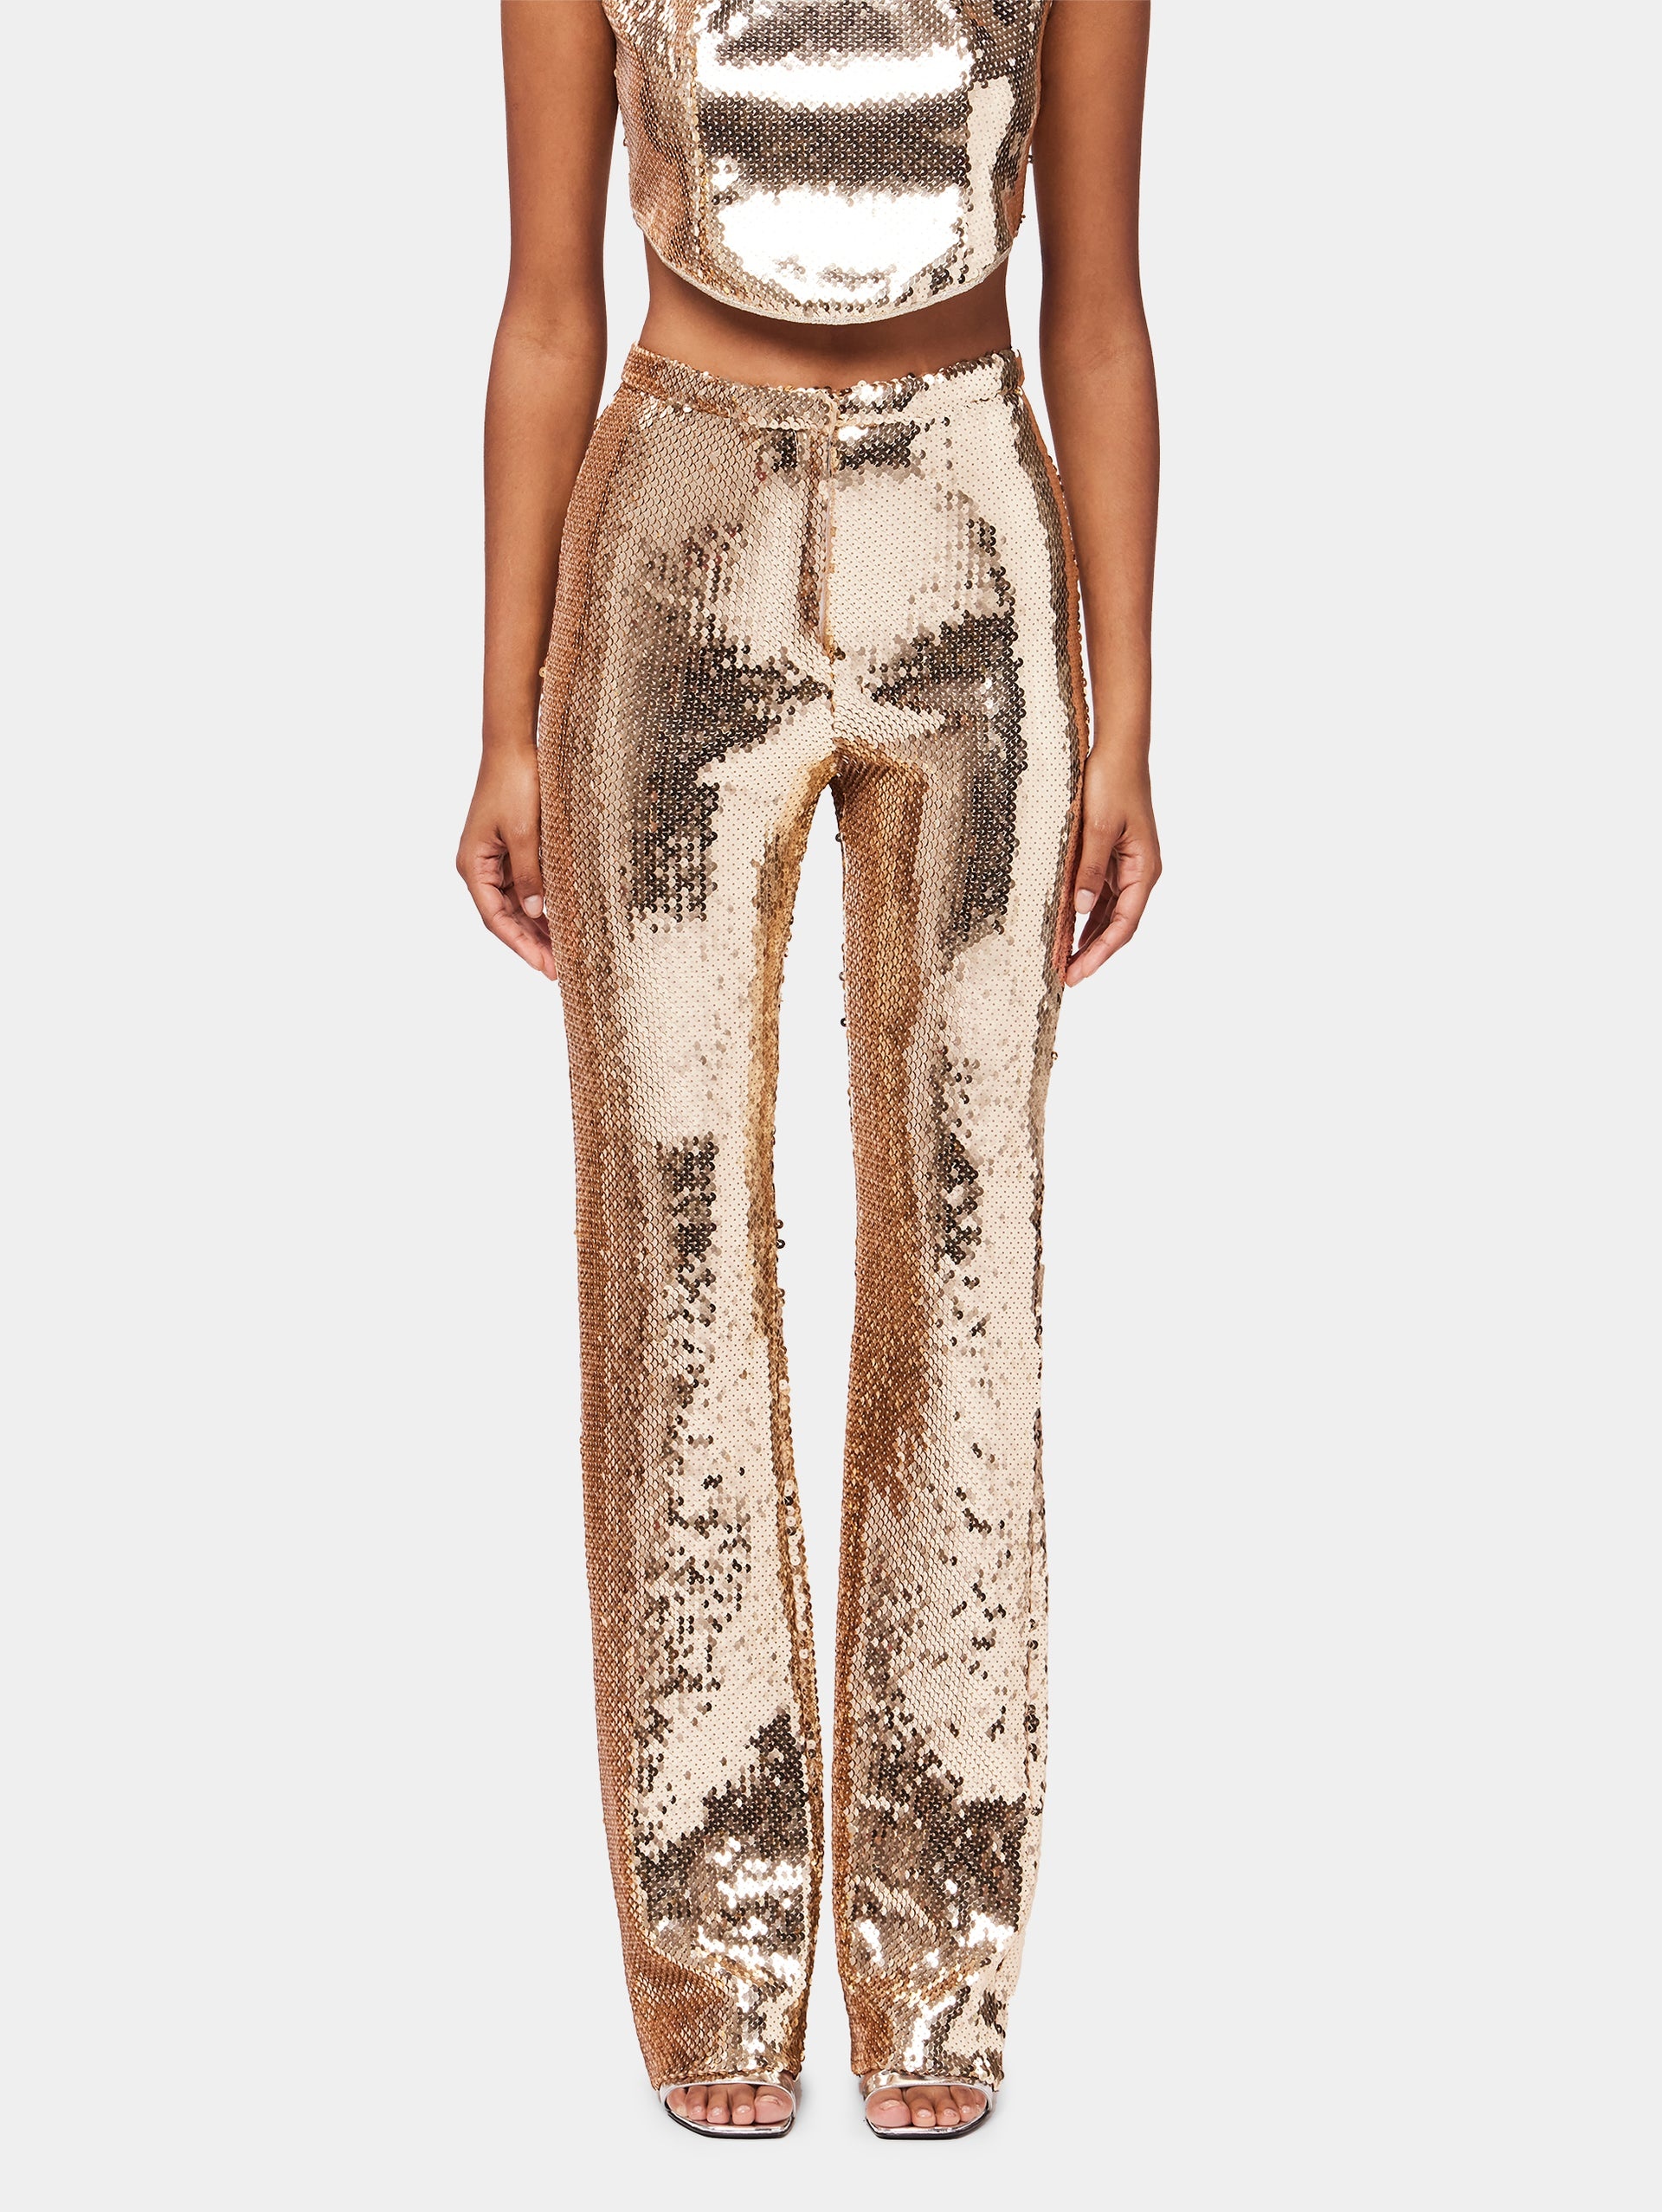 GOLD SEQUINS TROUSERS WITH METALLIC PEARLED DETAIL - 3